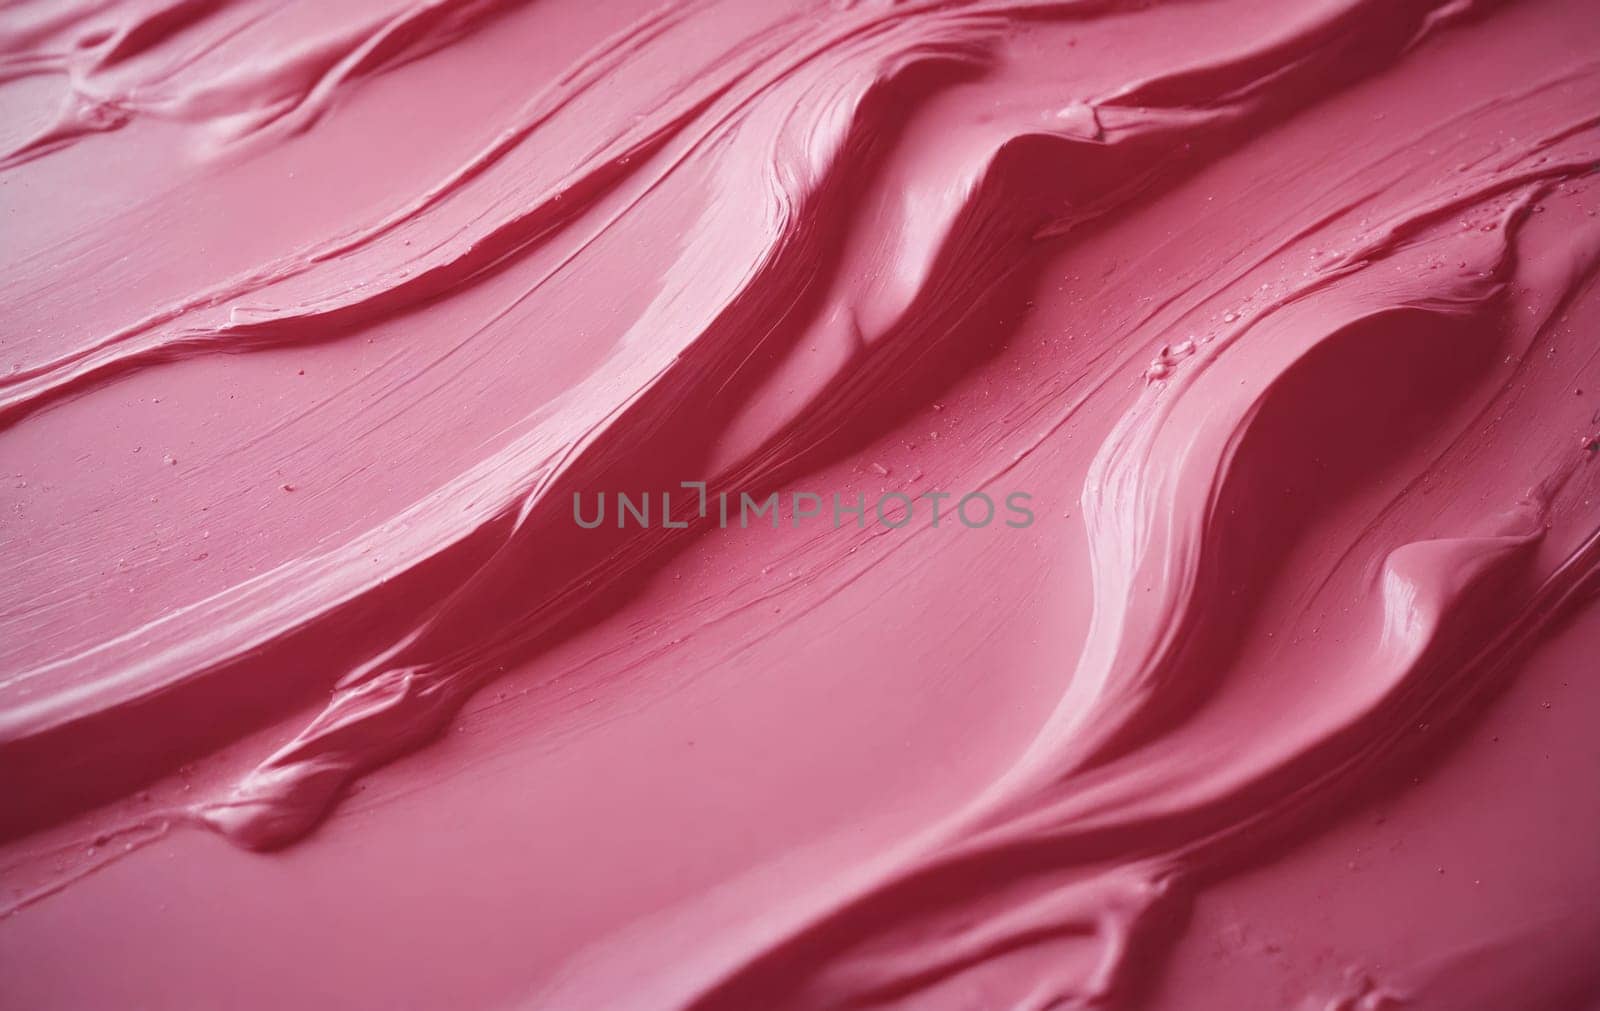 A closeup of a vibrant pink lipstick texture, showcasing a range of shades like petal, violet, magenta, and peach. The liquid formula creates a beautiful pattern with hints of carmine